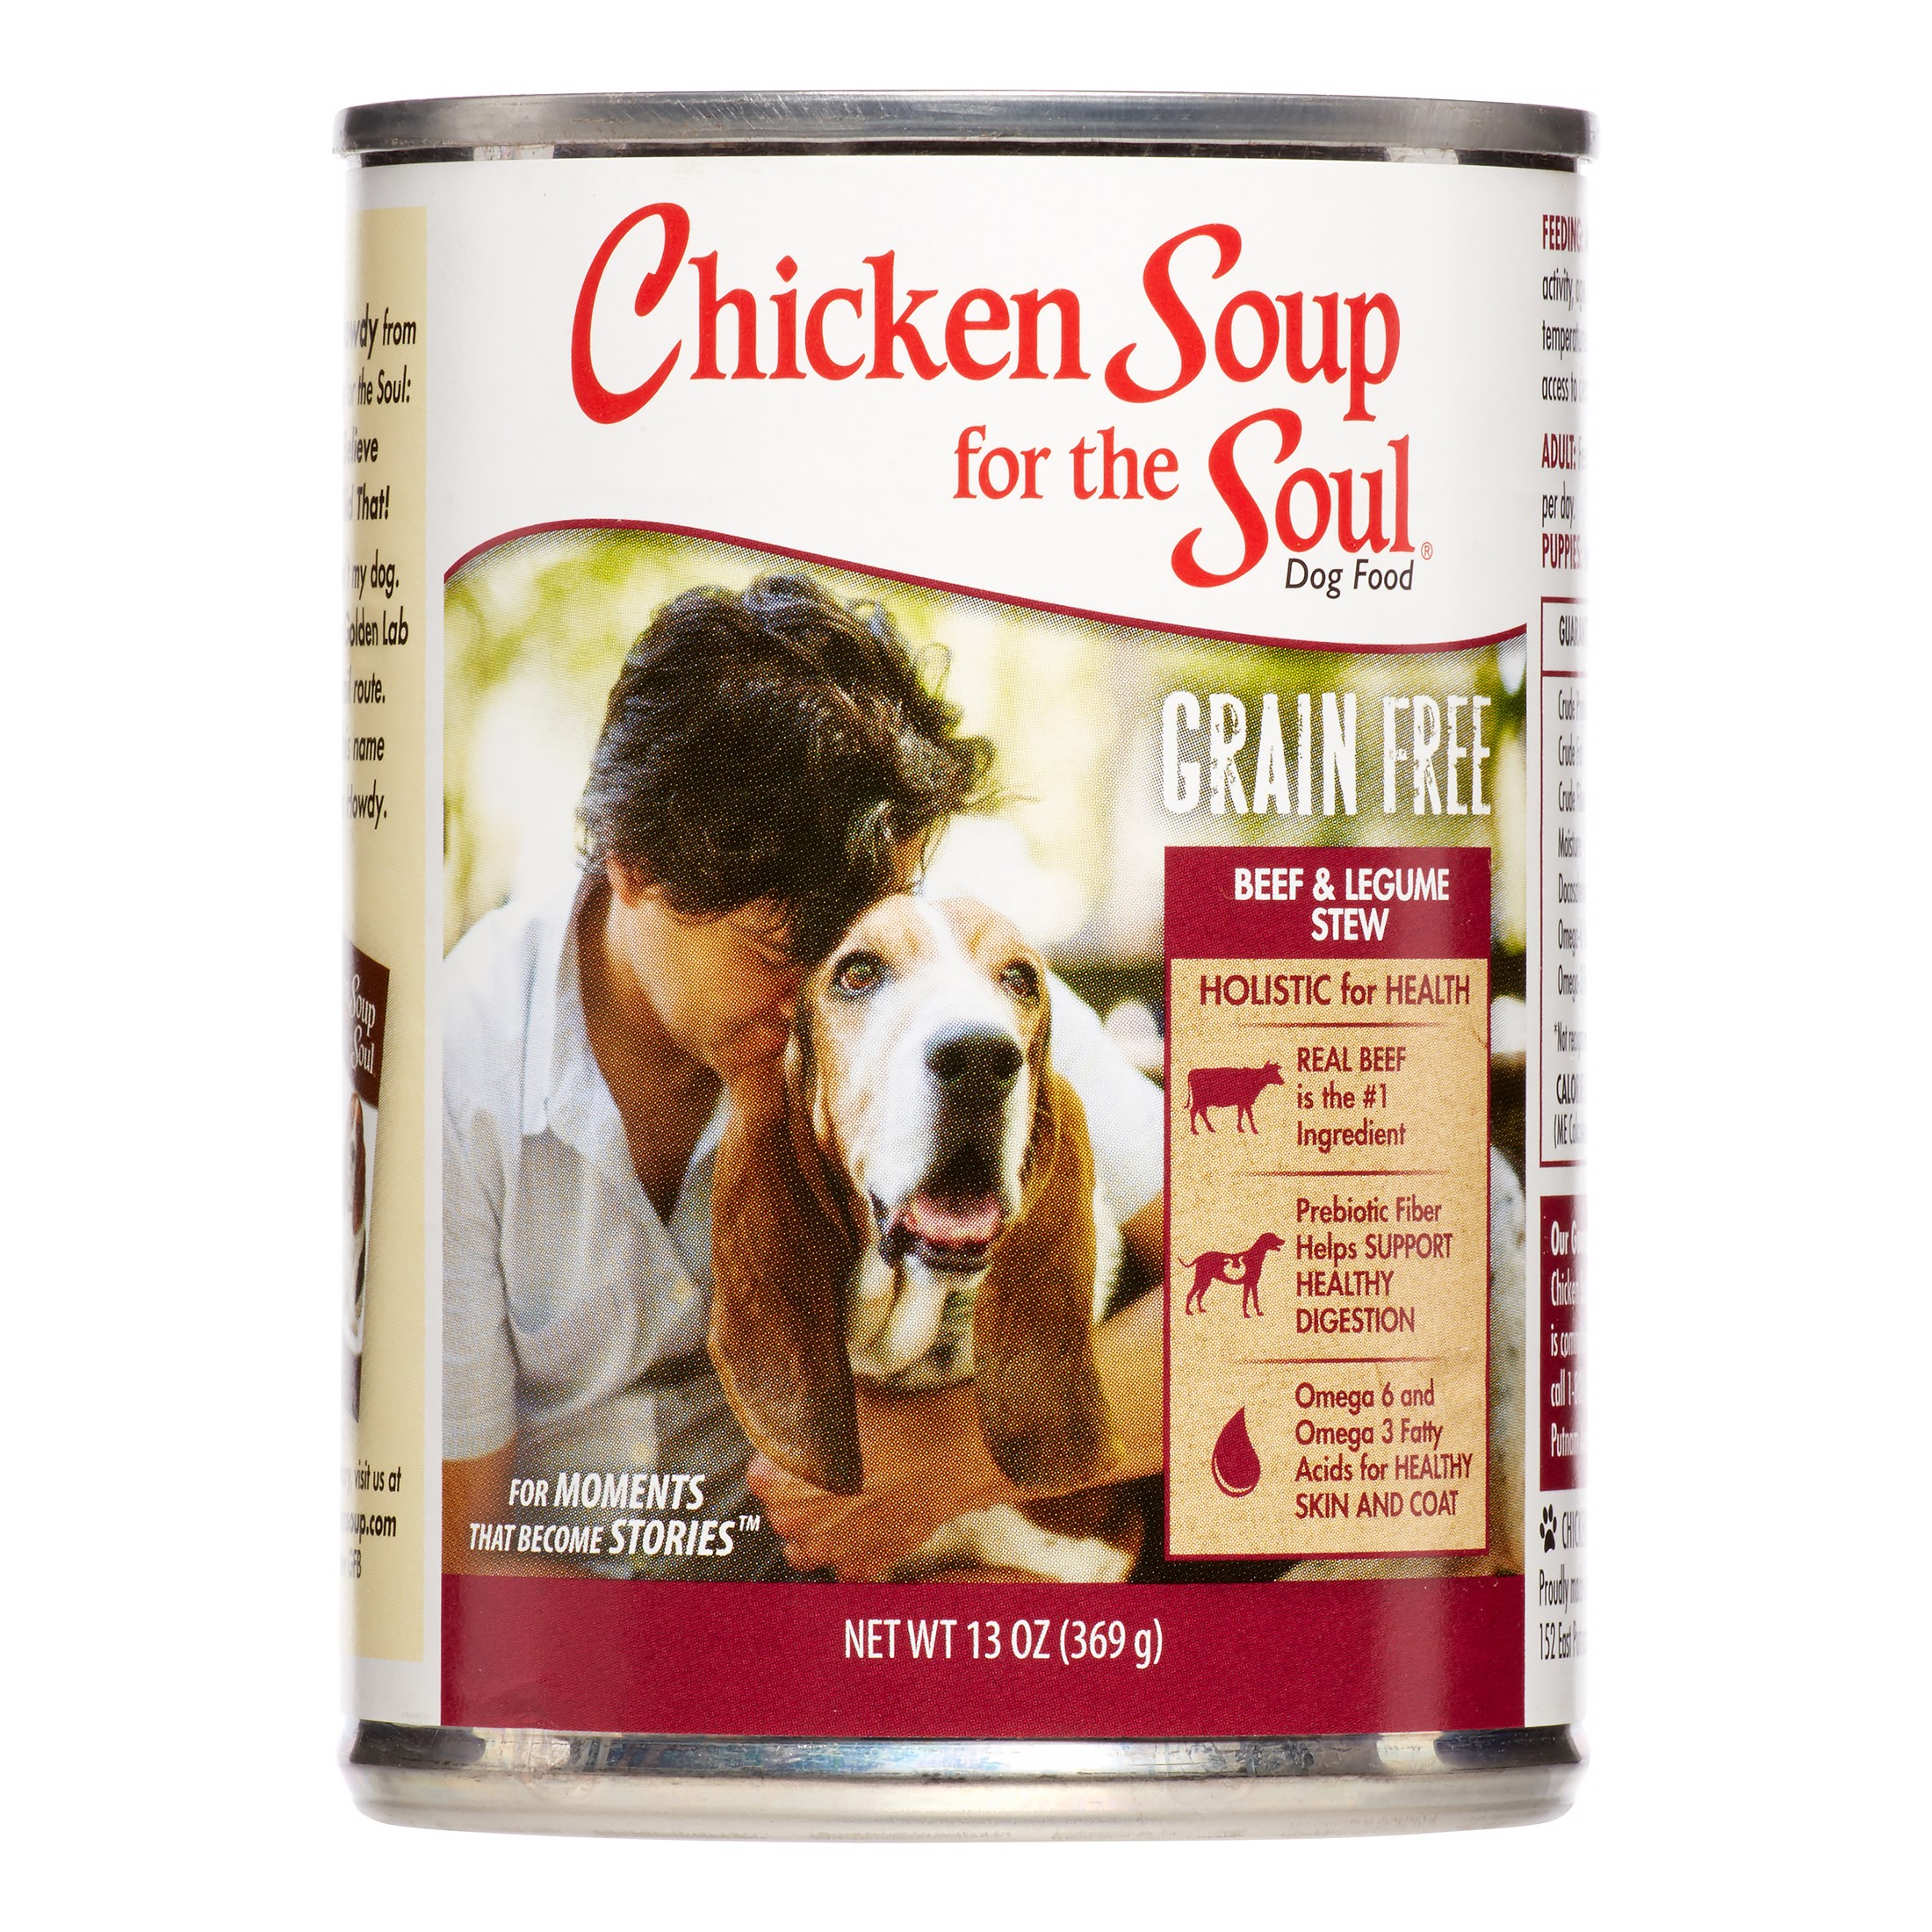 Chicken Soup For The Soul Grain